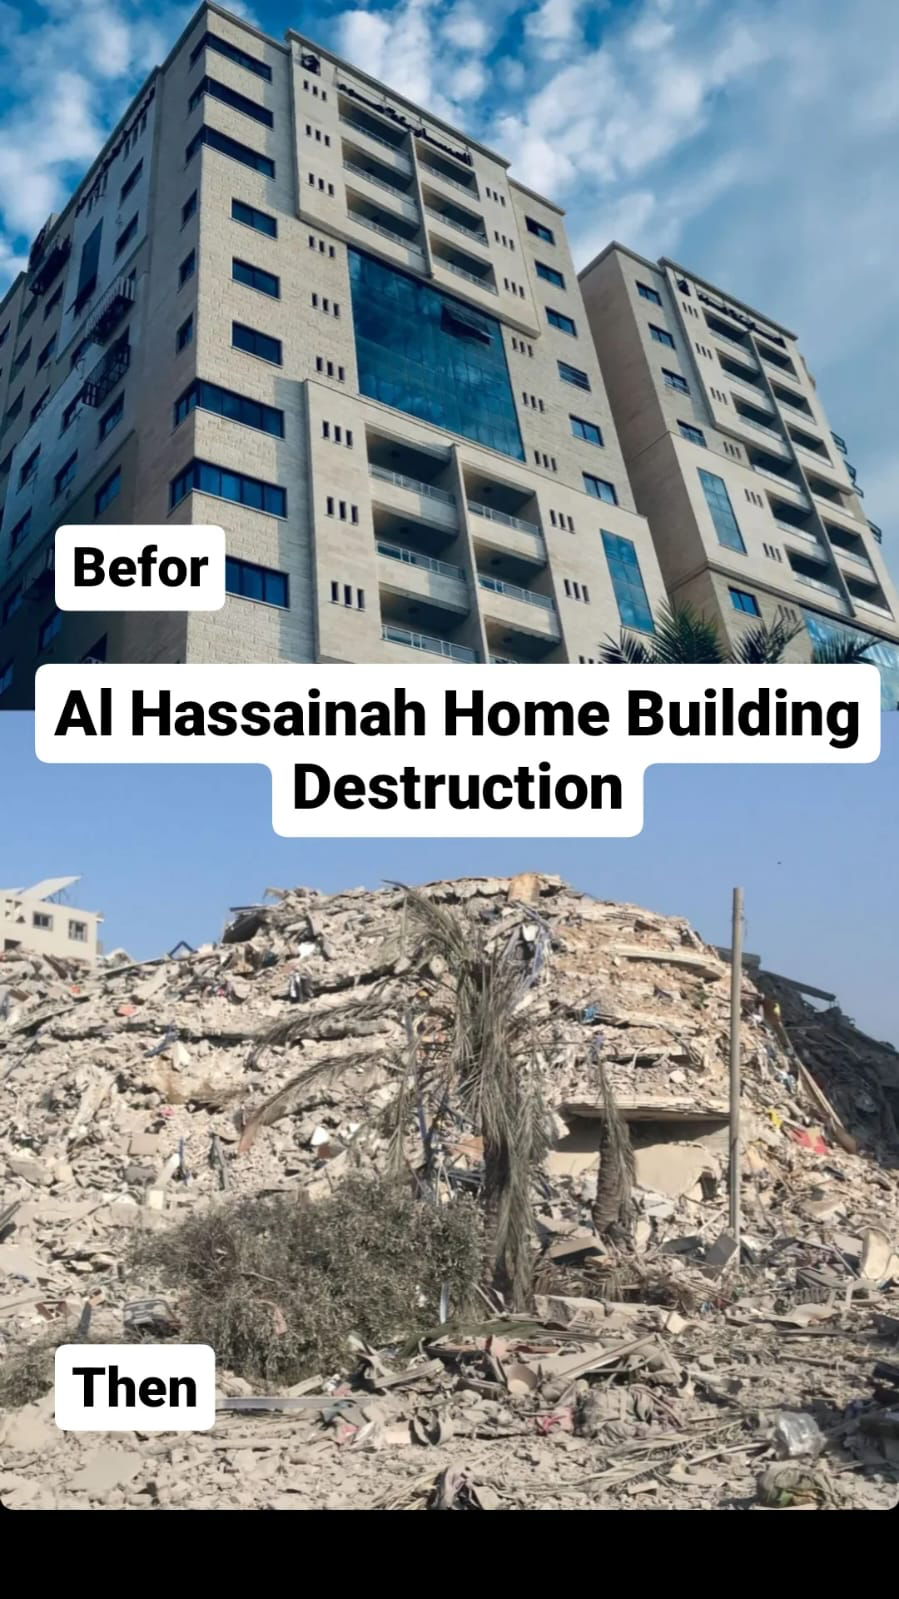 Text reads: "Al Hassainah Home Building Destruction" 
Top image says "before" and depicts a large apartment building against a blue sky.
Bottom image says "then" and depicts a large pile of rubble.